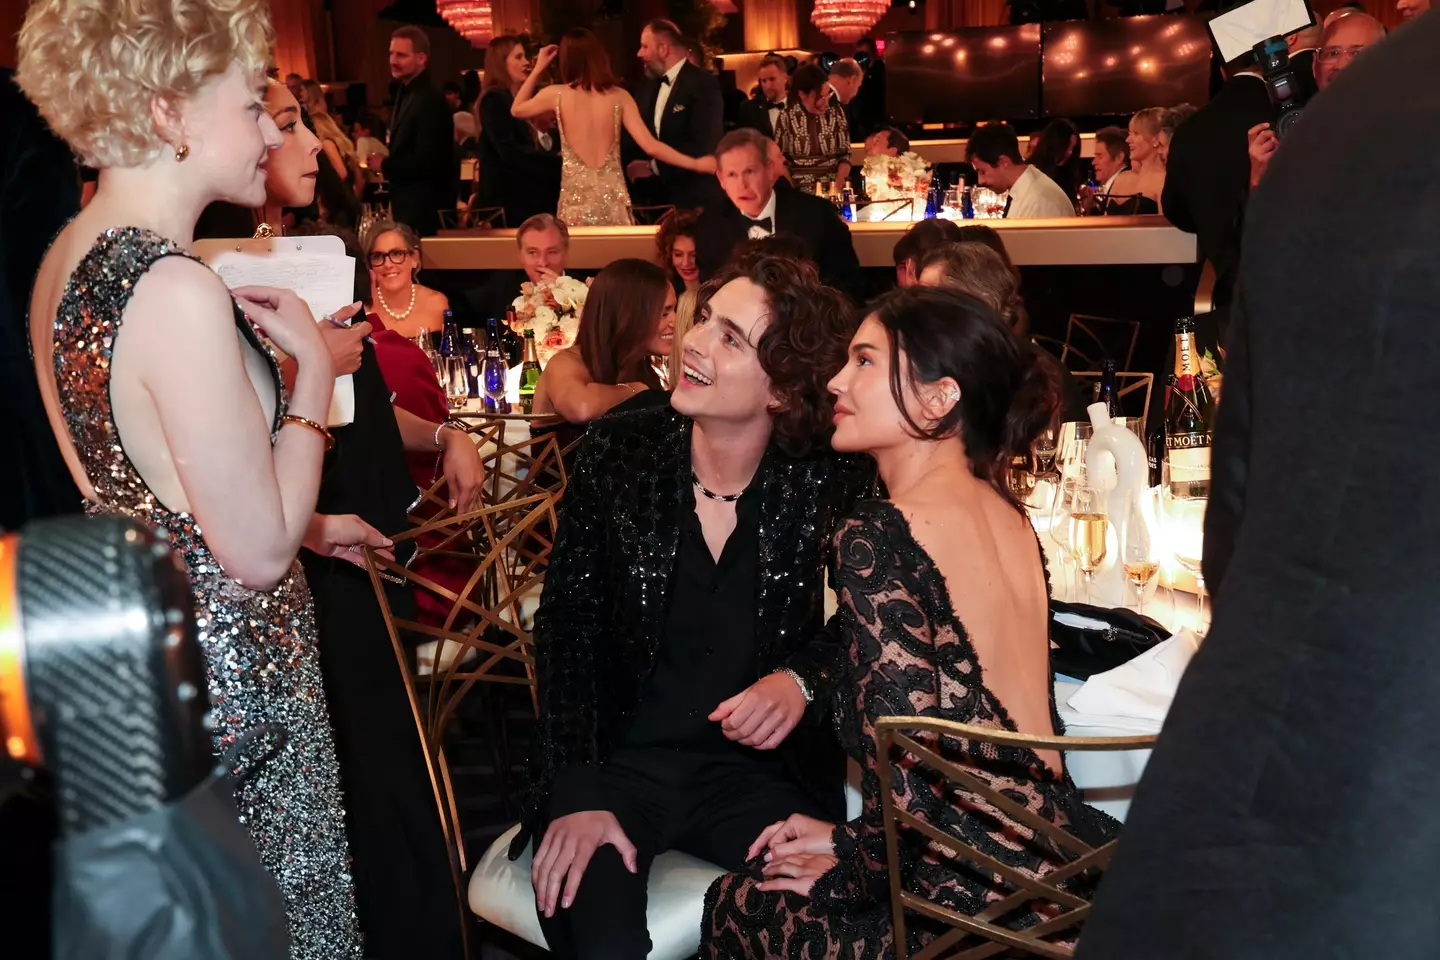 The pair sat together at last night's Golden Globes.